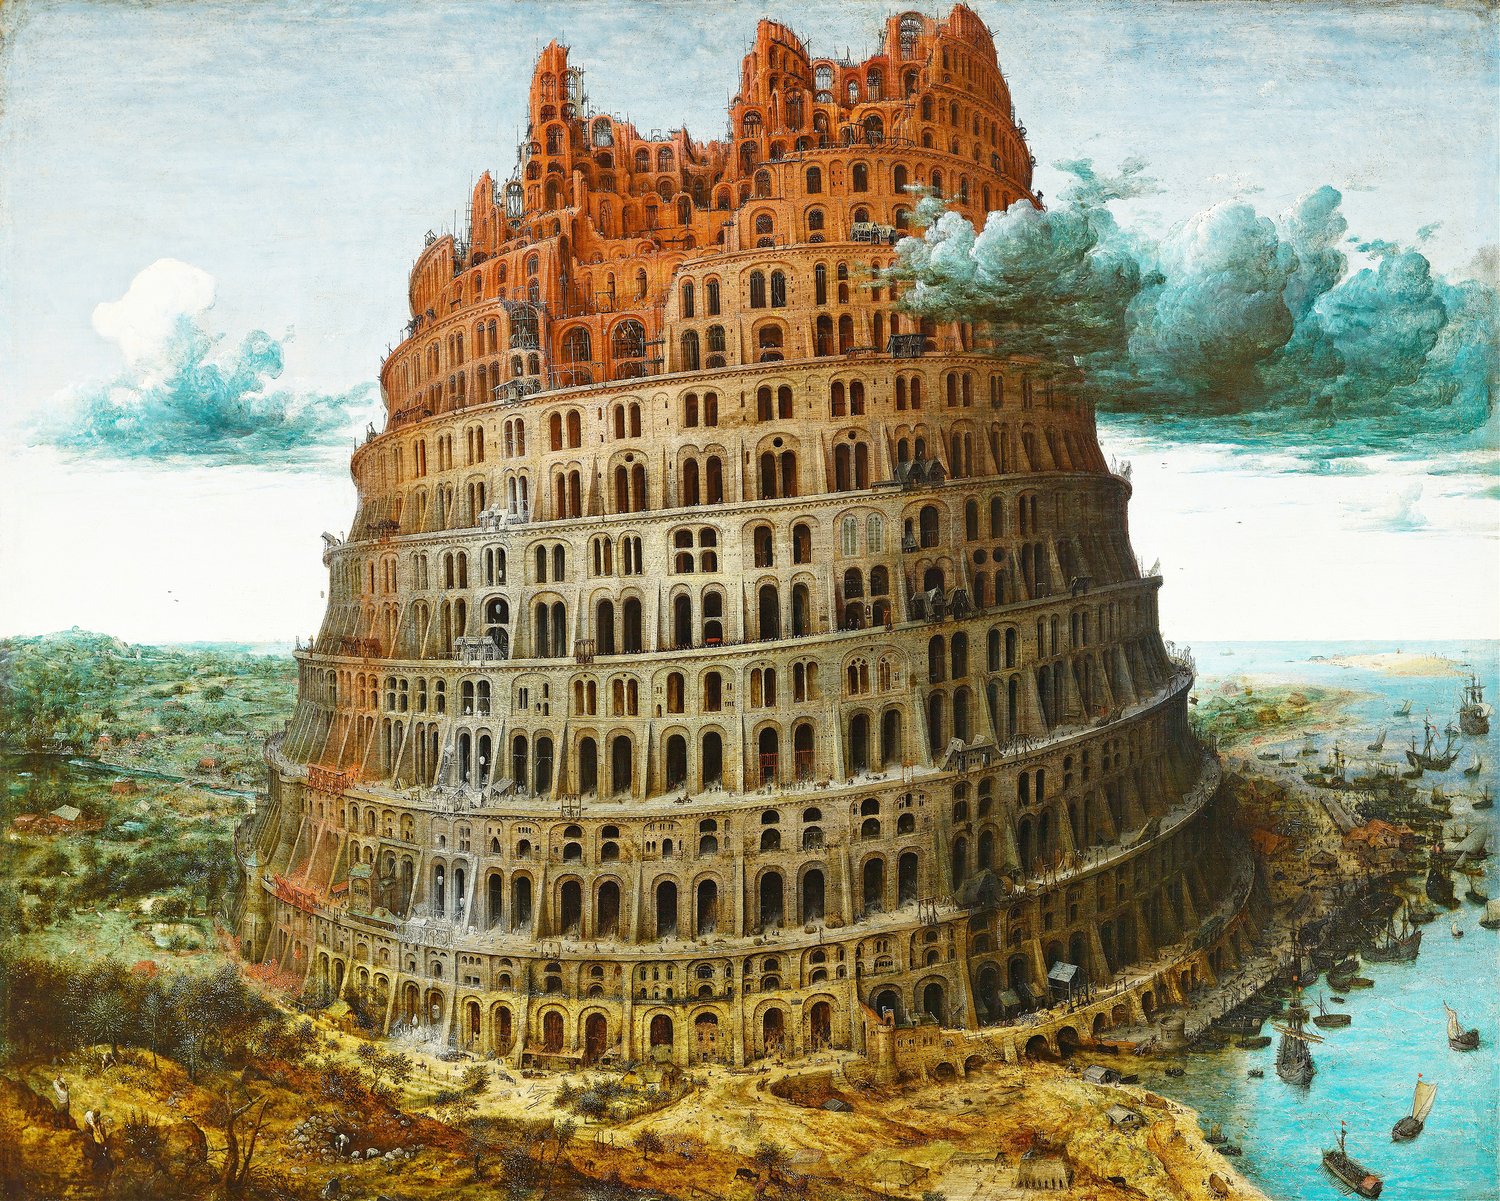 The Tower of Babel (circa 1563-1565)